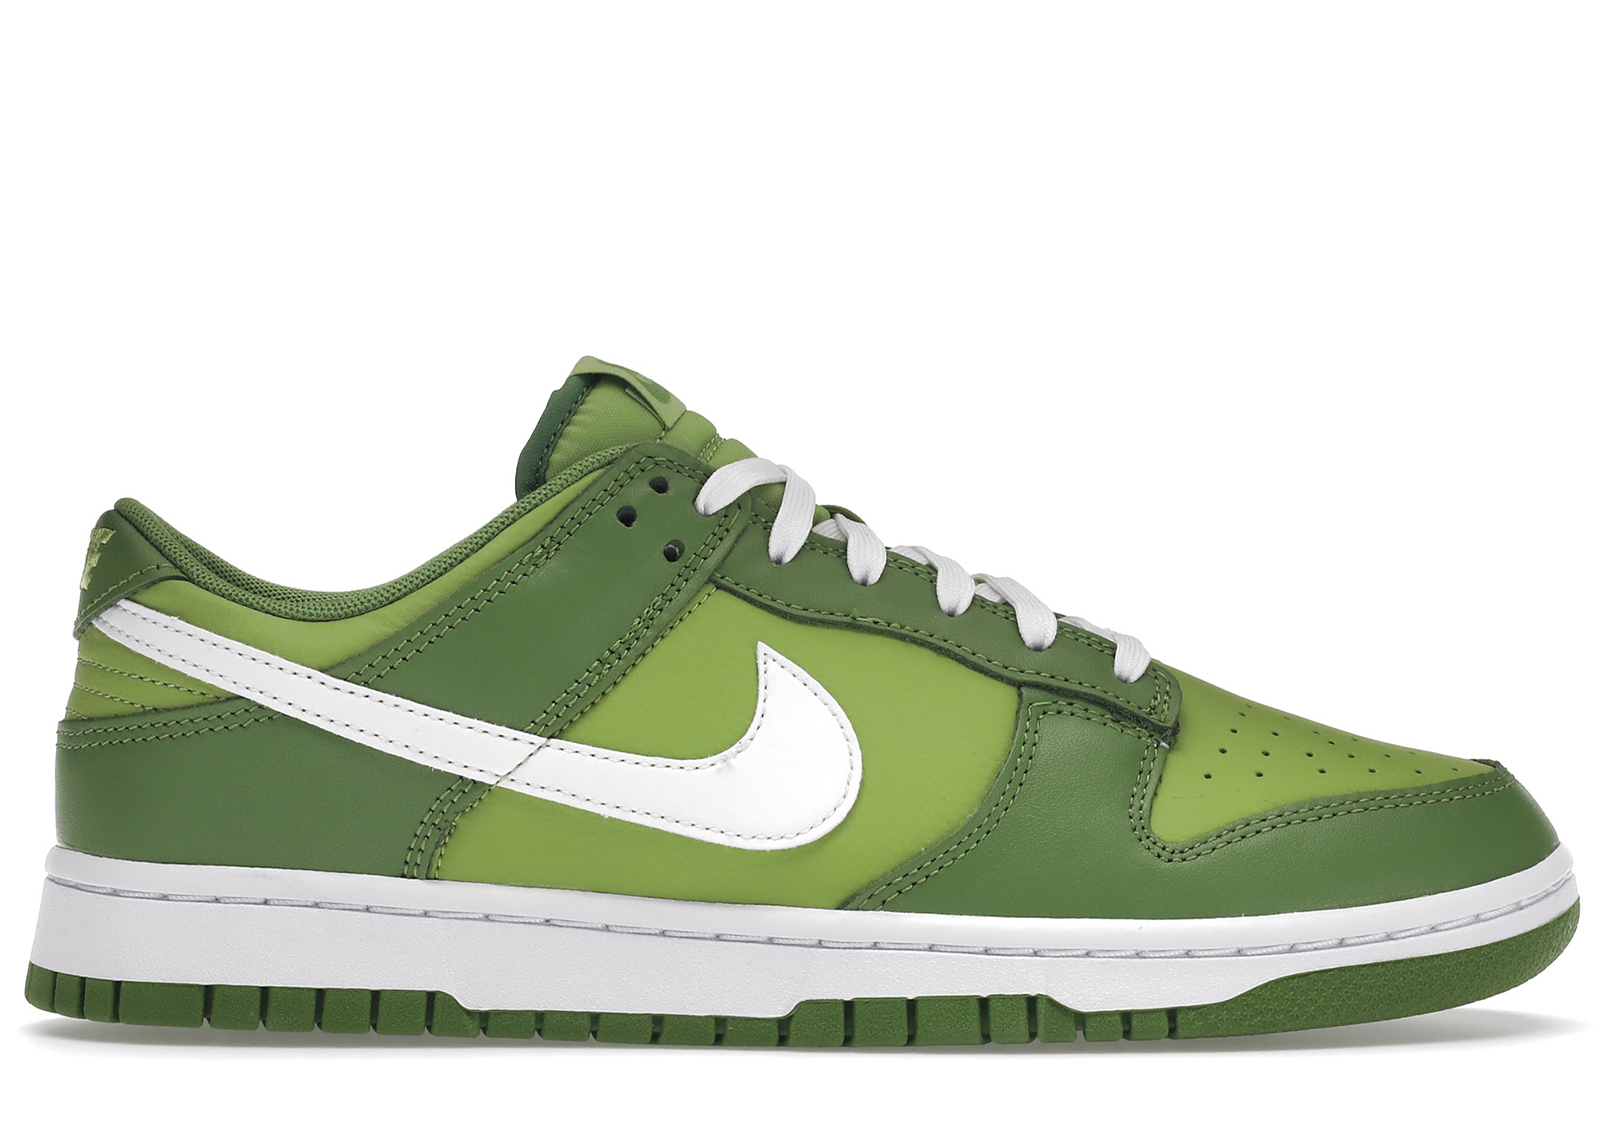 Buy Nike Dunk Size 10 Shoes & New Sneakers - StockX